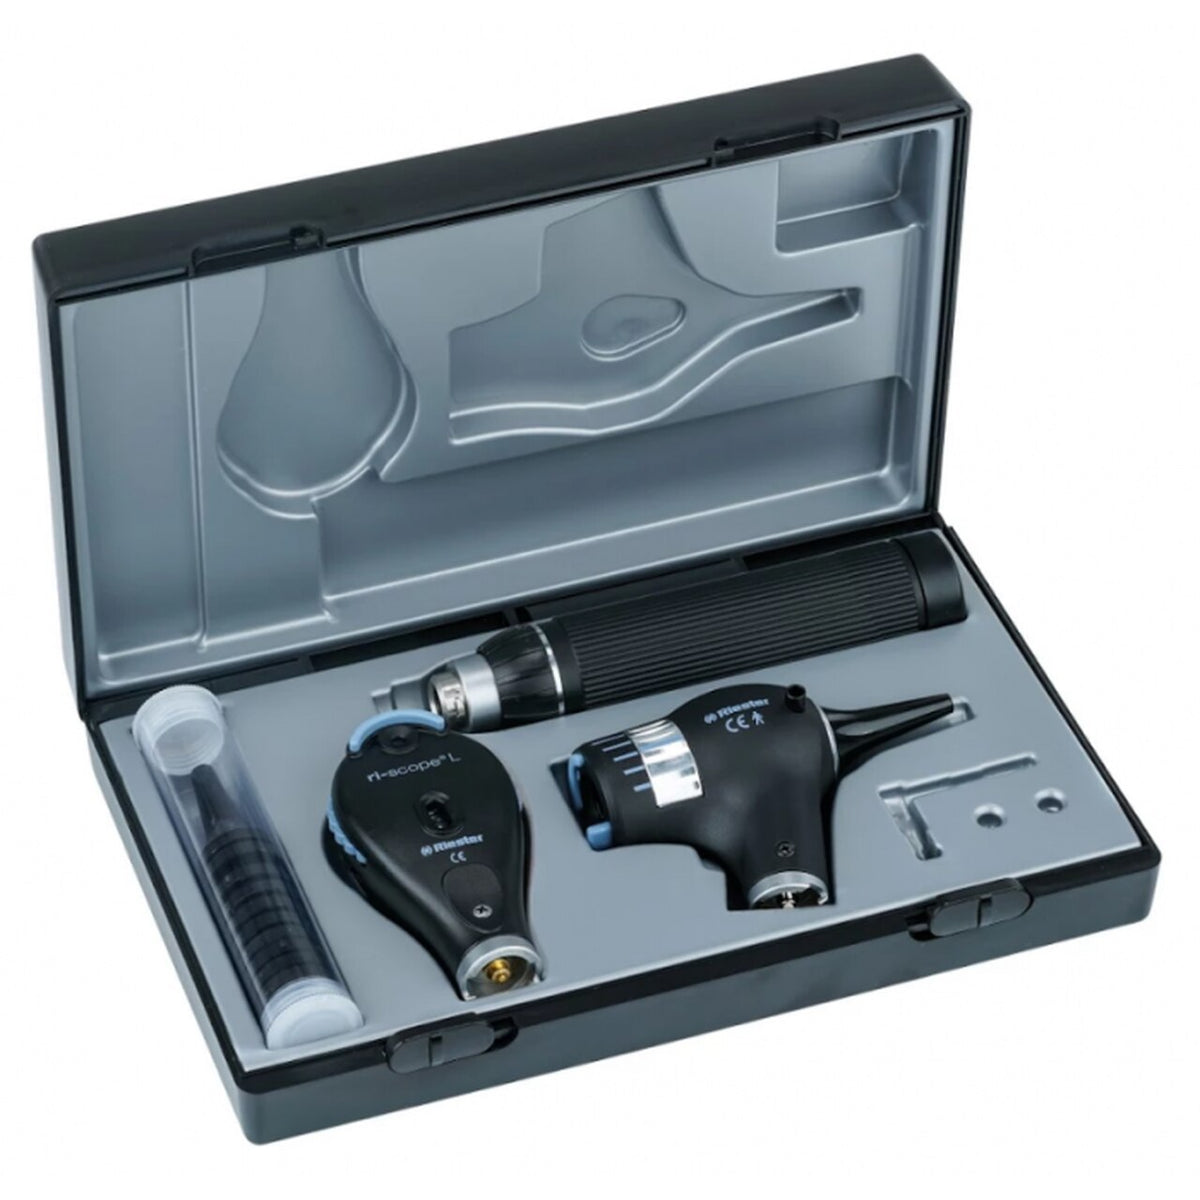 Riester EliteVue Otoscope / Ophthalmoscope Set LED 3.5 V, with 2 x C Handles, 2 Rechargeable Li-Ion Batteries &amp; Desk Charger